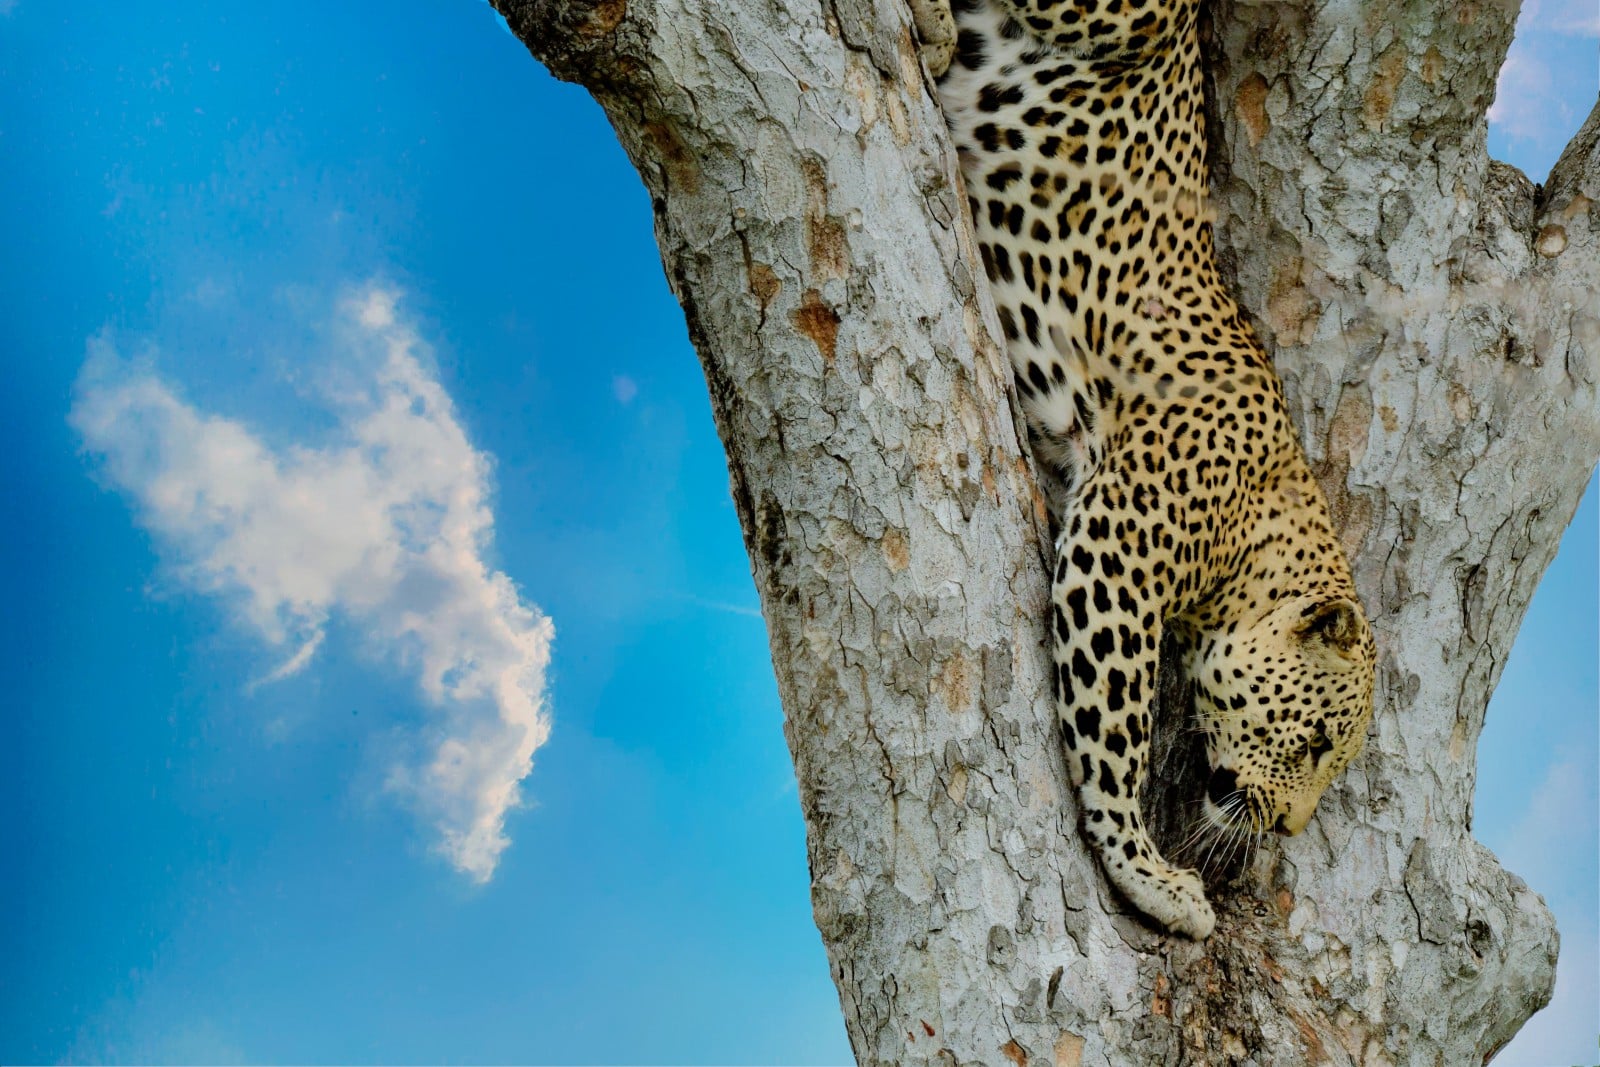 <p>Welcome to the Best Places to see Leopards in Africa.</p><p><a href="https://www.animalsaroundtheglobe.com/animals-in-africa/" rel="noreferrer noopener">Africa</a>, home to the largest living animals and the most vicious predators. It is home to the mighty Leopard; only here can you find the best places to spot Leopards.</p><p>Follow us on a tour through the <a href="https://www.animalsaroundtheglobe.com/the-best-places-to-see-the-big-5/" rel="noreferrer noopener">continent</a> where humans can see and spot Leopards – Africa!</p><p>We also have articles on the best places to see <a href="https://www.animalsaroundtheglobe.com/cats/best-places-to-see-iberian-lynx/"><strong><span>Lynx</span></strong></a>.</p>              Sharks, lions, tigers, as well as all about cats & dogs!           <a href='https://www.msn.com/en-us/channel/source/Animals%20Around%20The%20Globe%20US/sr-vid-ryujycftmyx7d7tmb5trkya28raxe6r56iuty5739ky2rf5d5wws?ocid=anaheim-ntp-following&cvid=1ff21e393be1475a8b3dd9a83a86b8df&ei=10'>           Click here to get to the Animals Around The Globe profile page</a><b> and hit "Follow" to never miss out.</b>